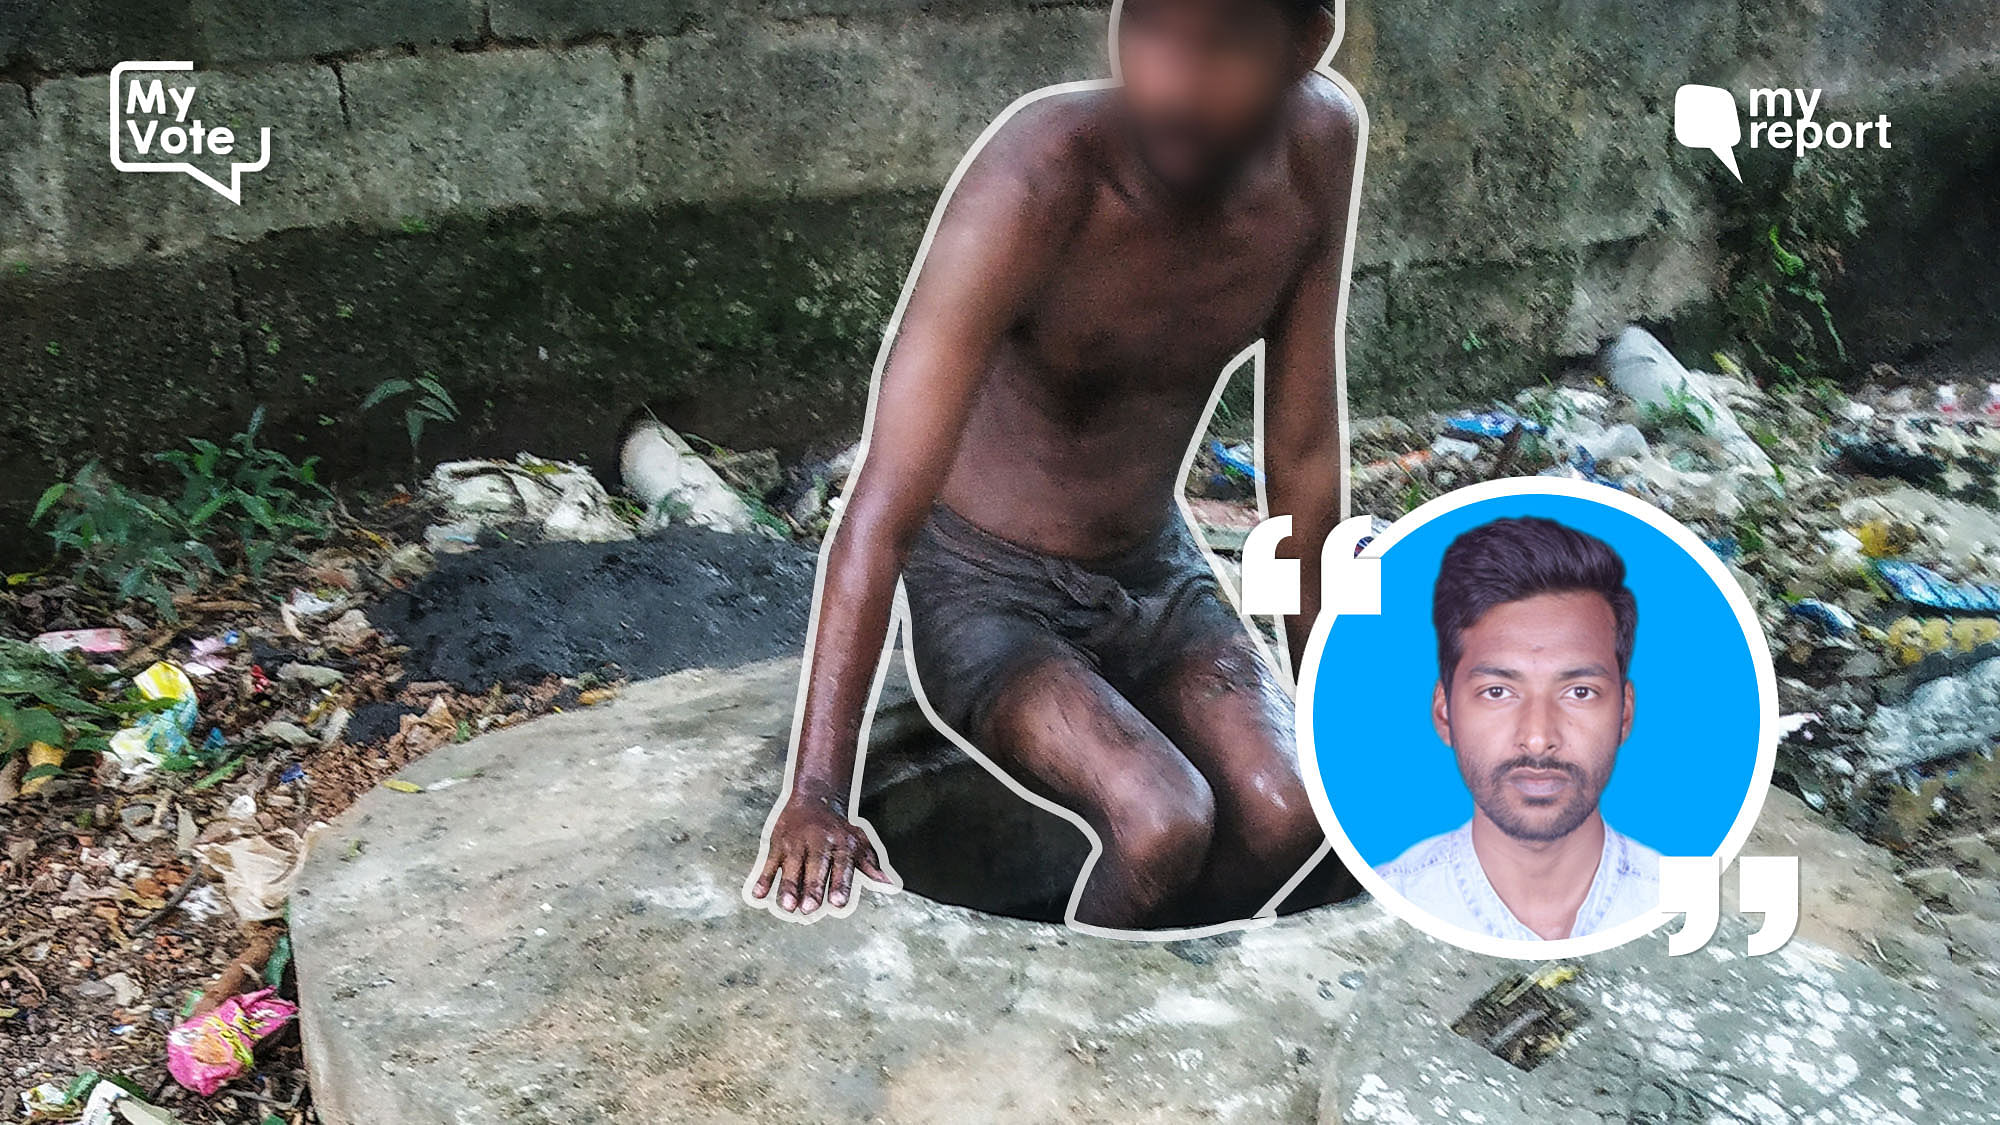 Citizen journalist Lokesh Bag’s encounter with a manual scavenger in Bhubaneshwar has made him wish for an India free of such an inhuman occupation.